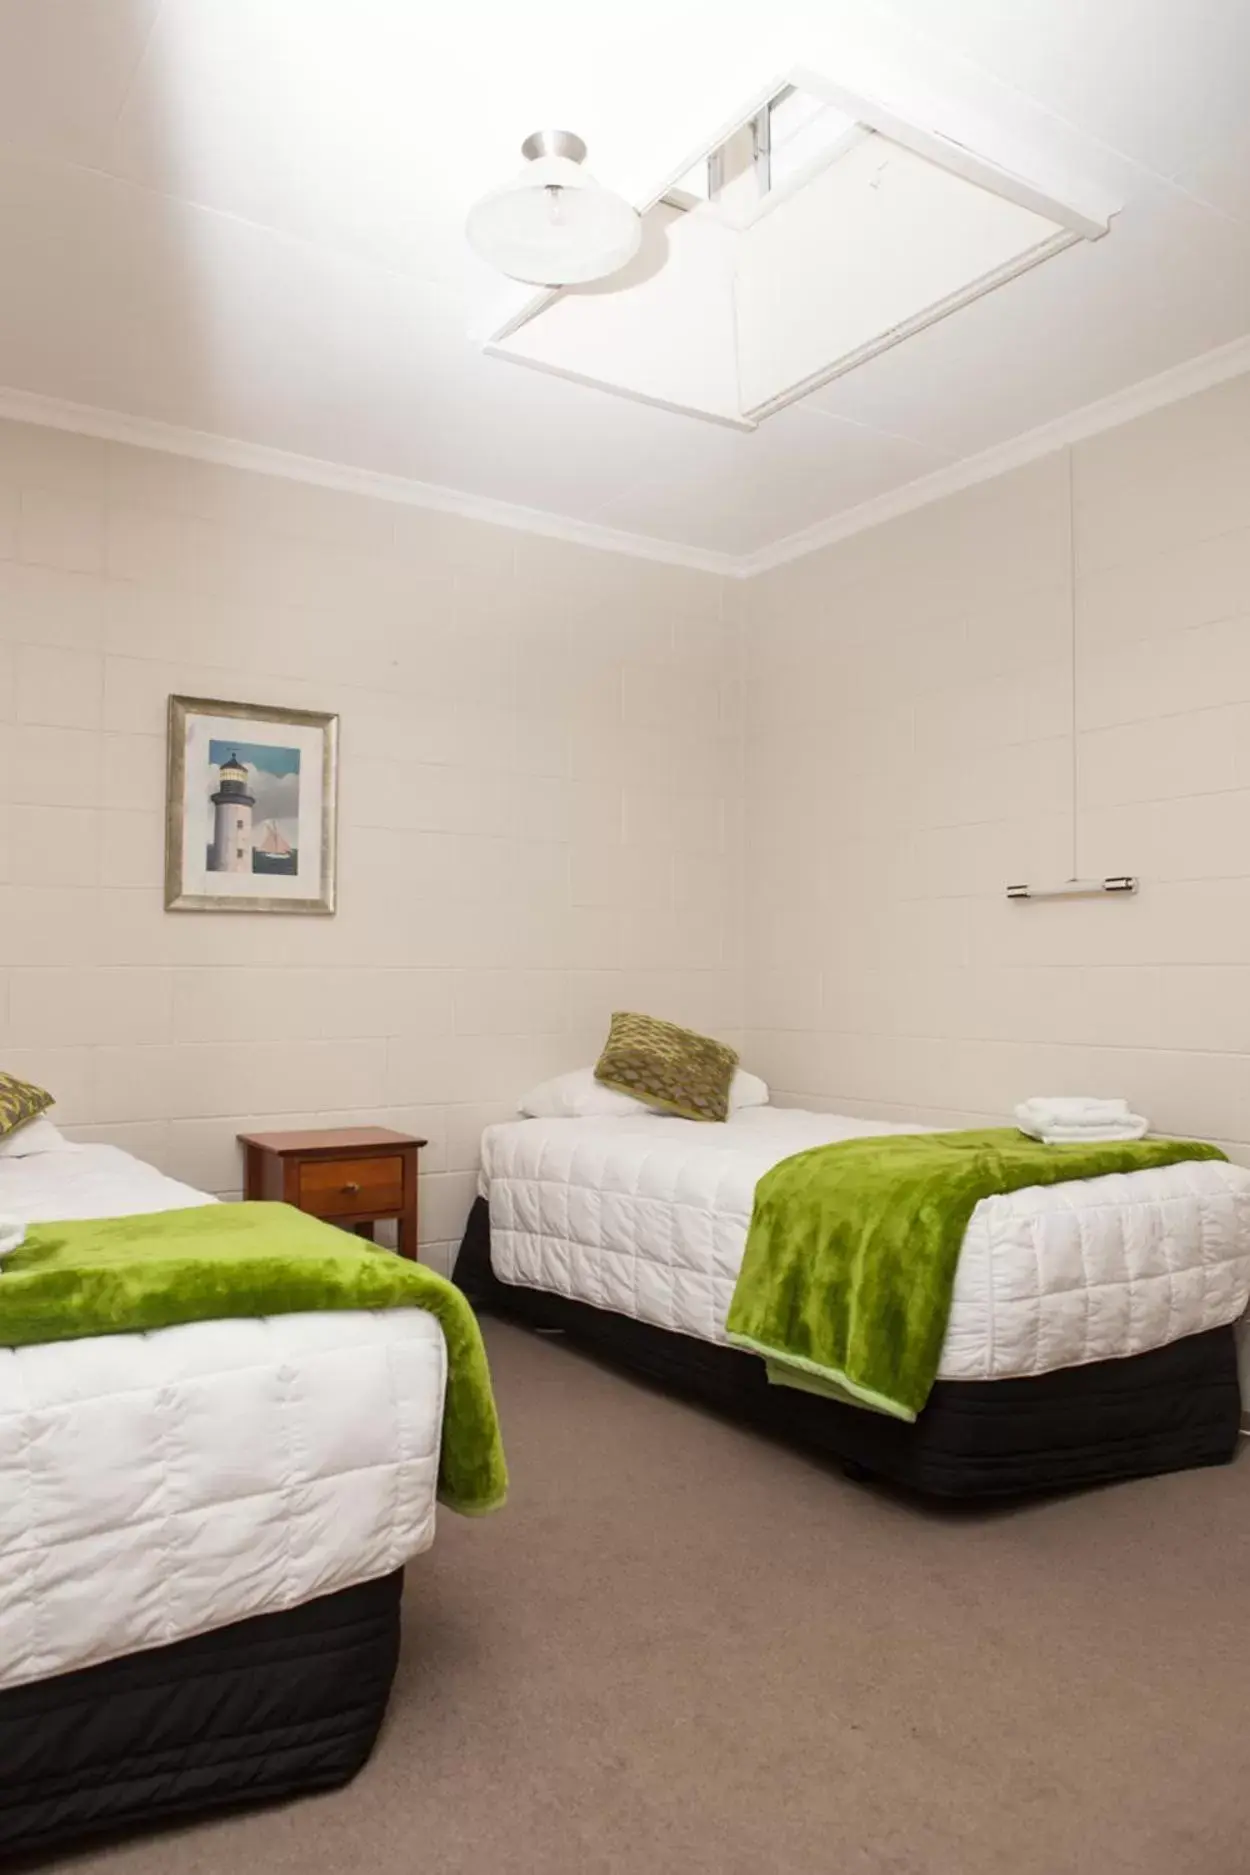 Bed in Picton Accommodation Gateway Motel